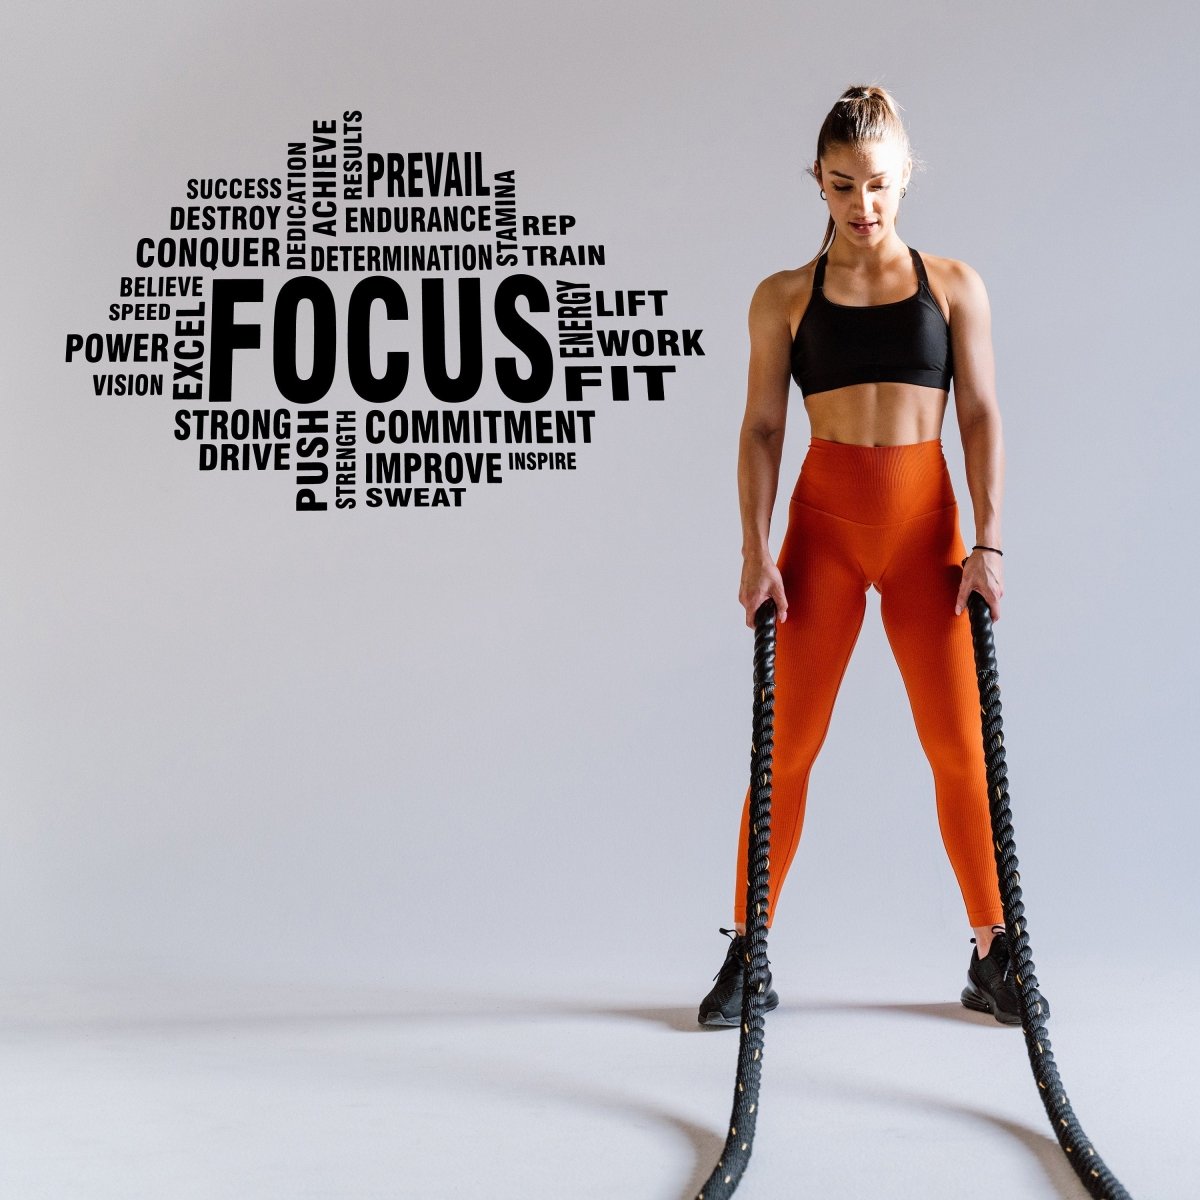 Fitness Inspiration Wall Decals - Decords